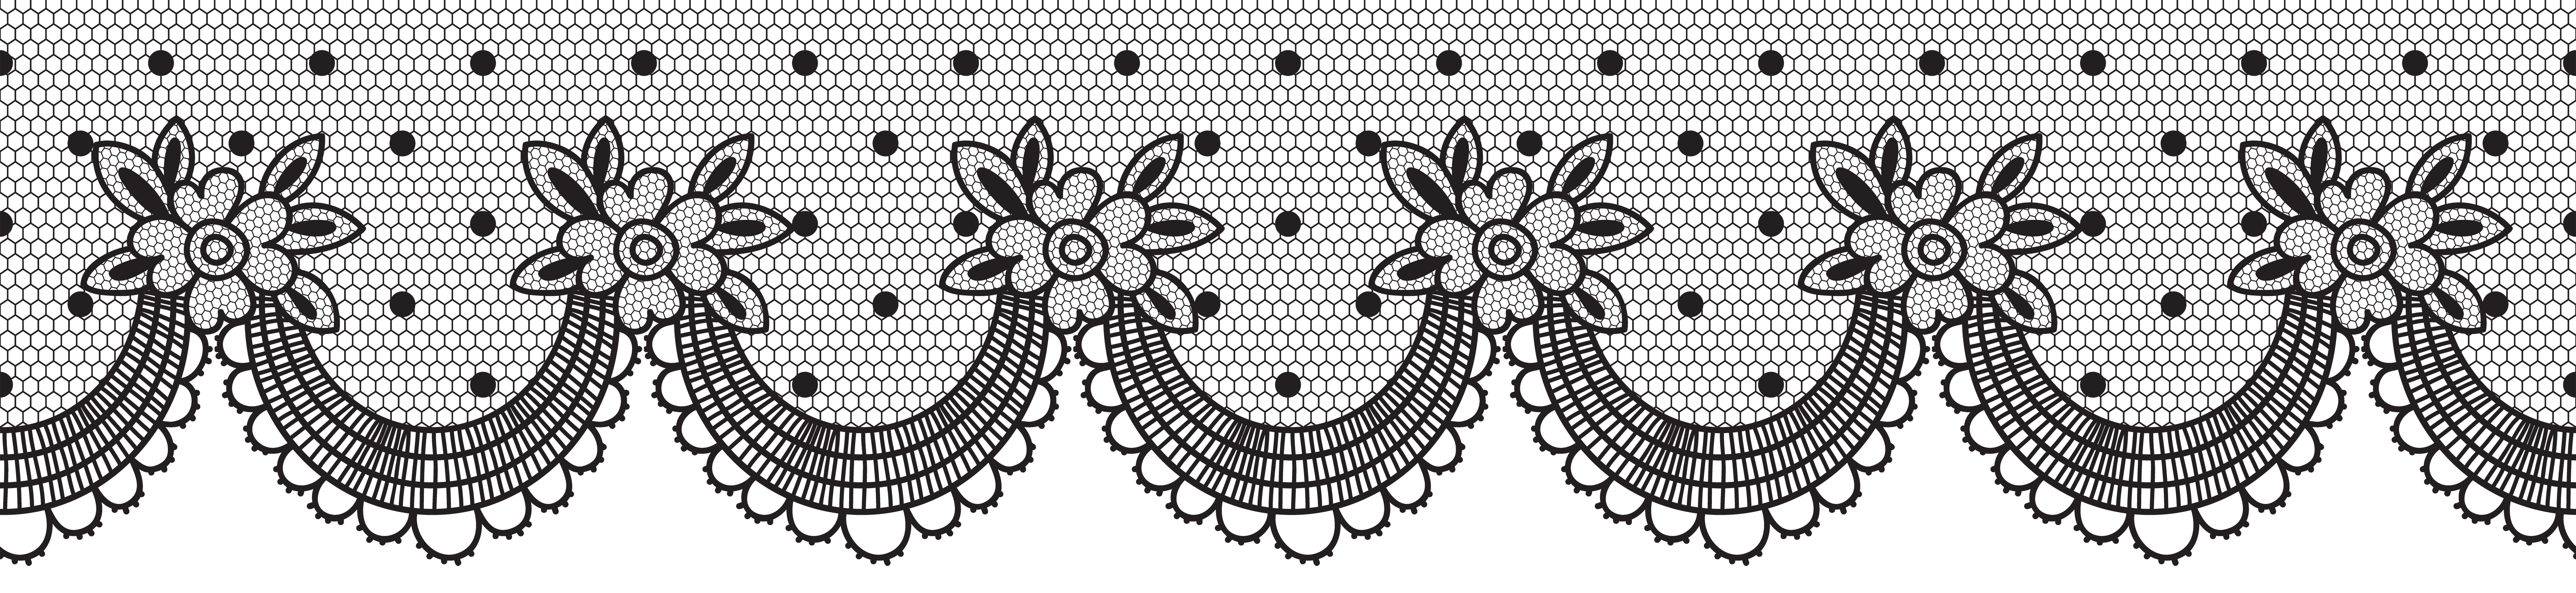 Deco Lace Transparent PNG Clip Art Image | Gallery Yopriceville - High ...